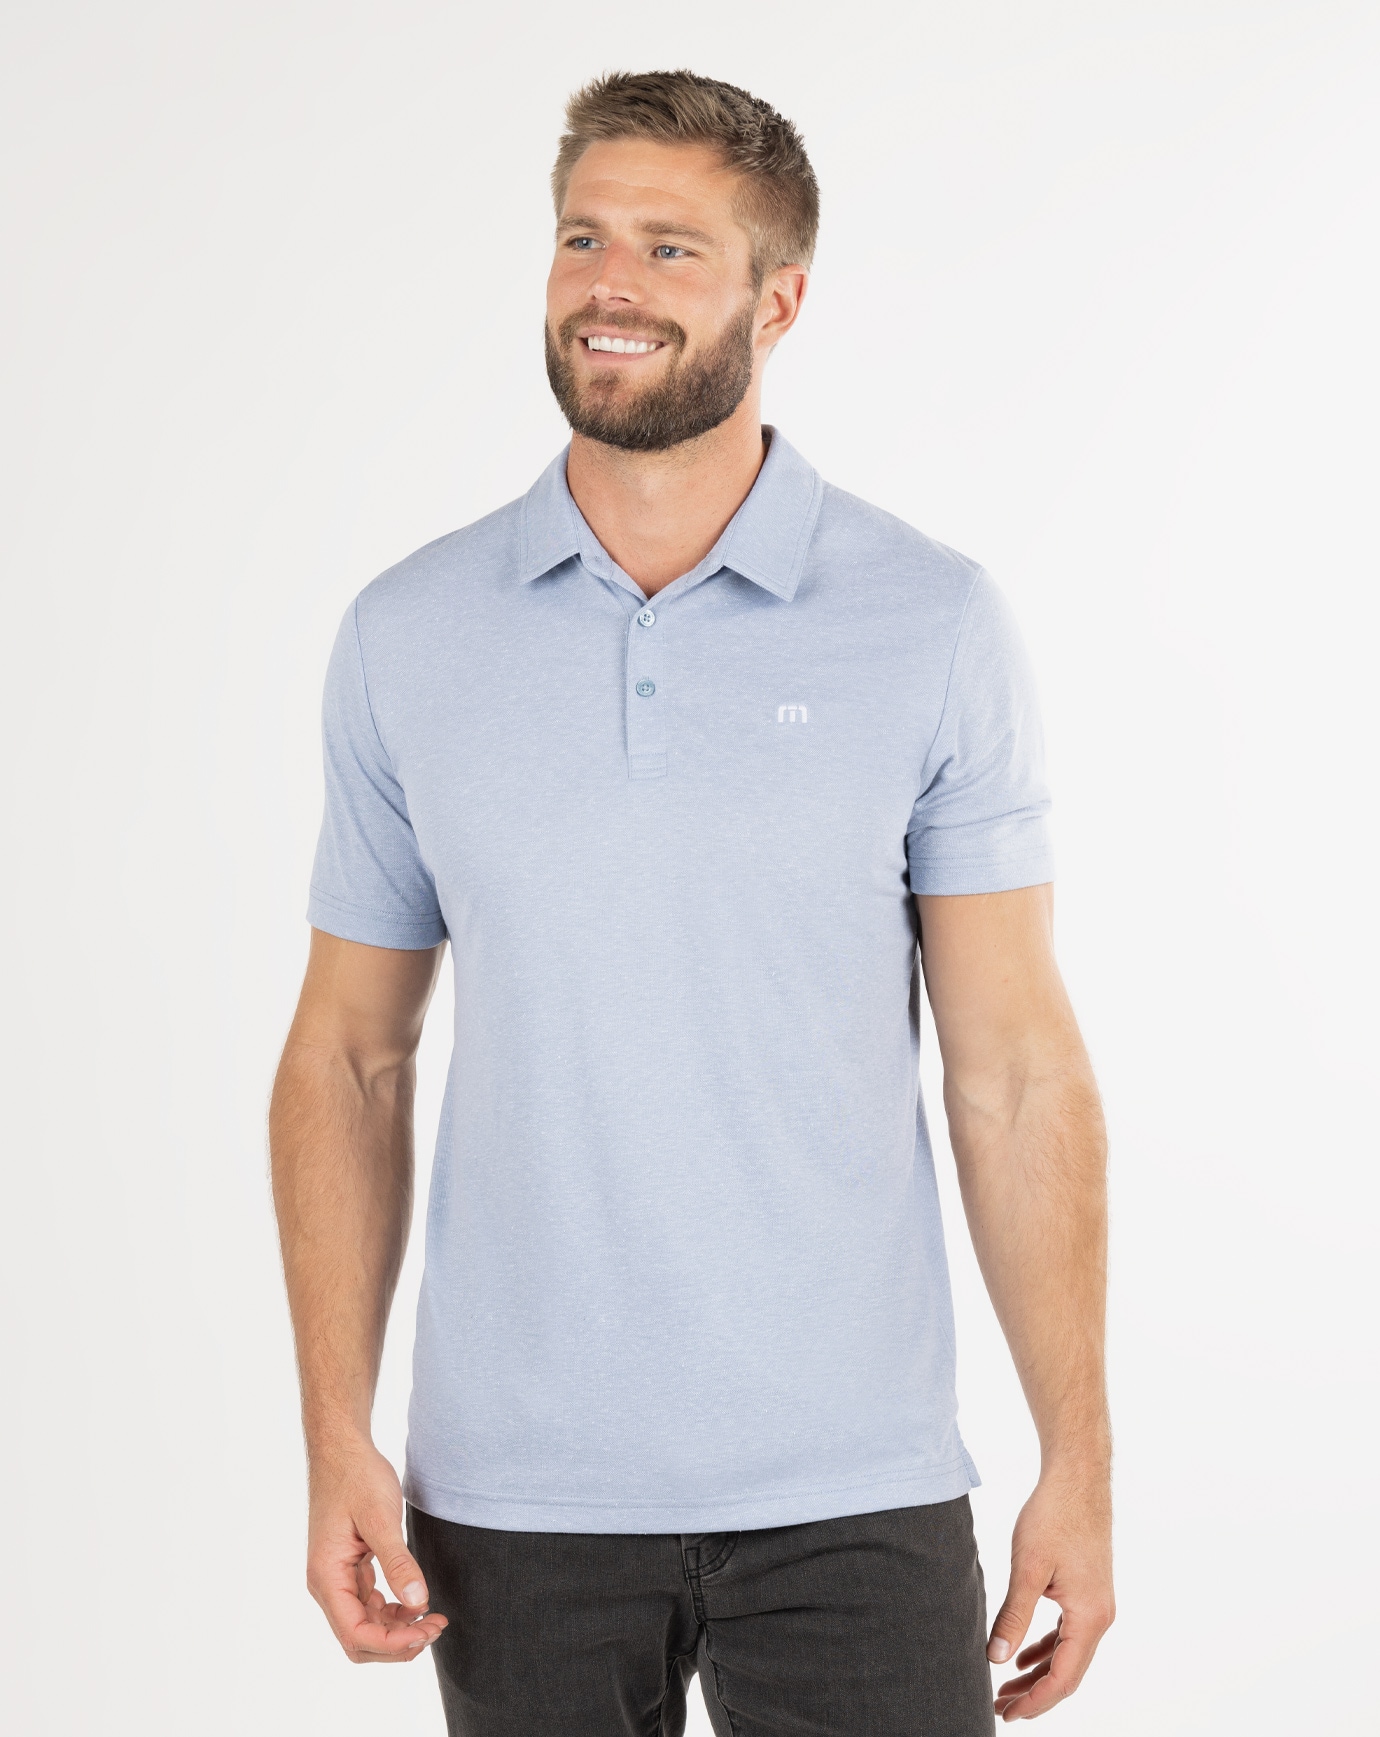 Related Product - KNOT ON CALL POLO